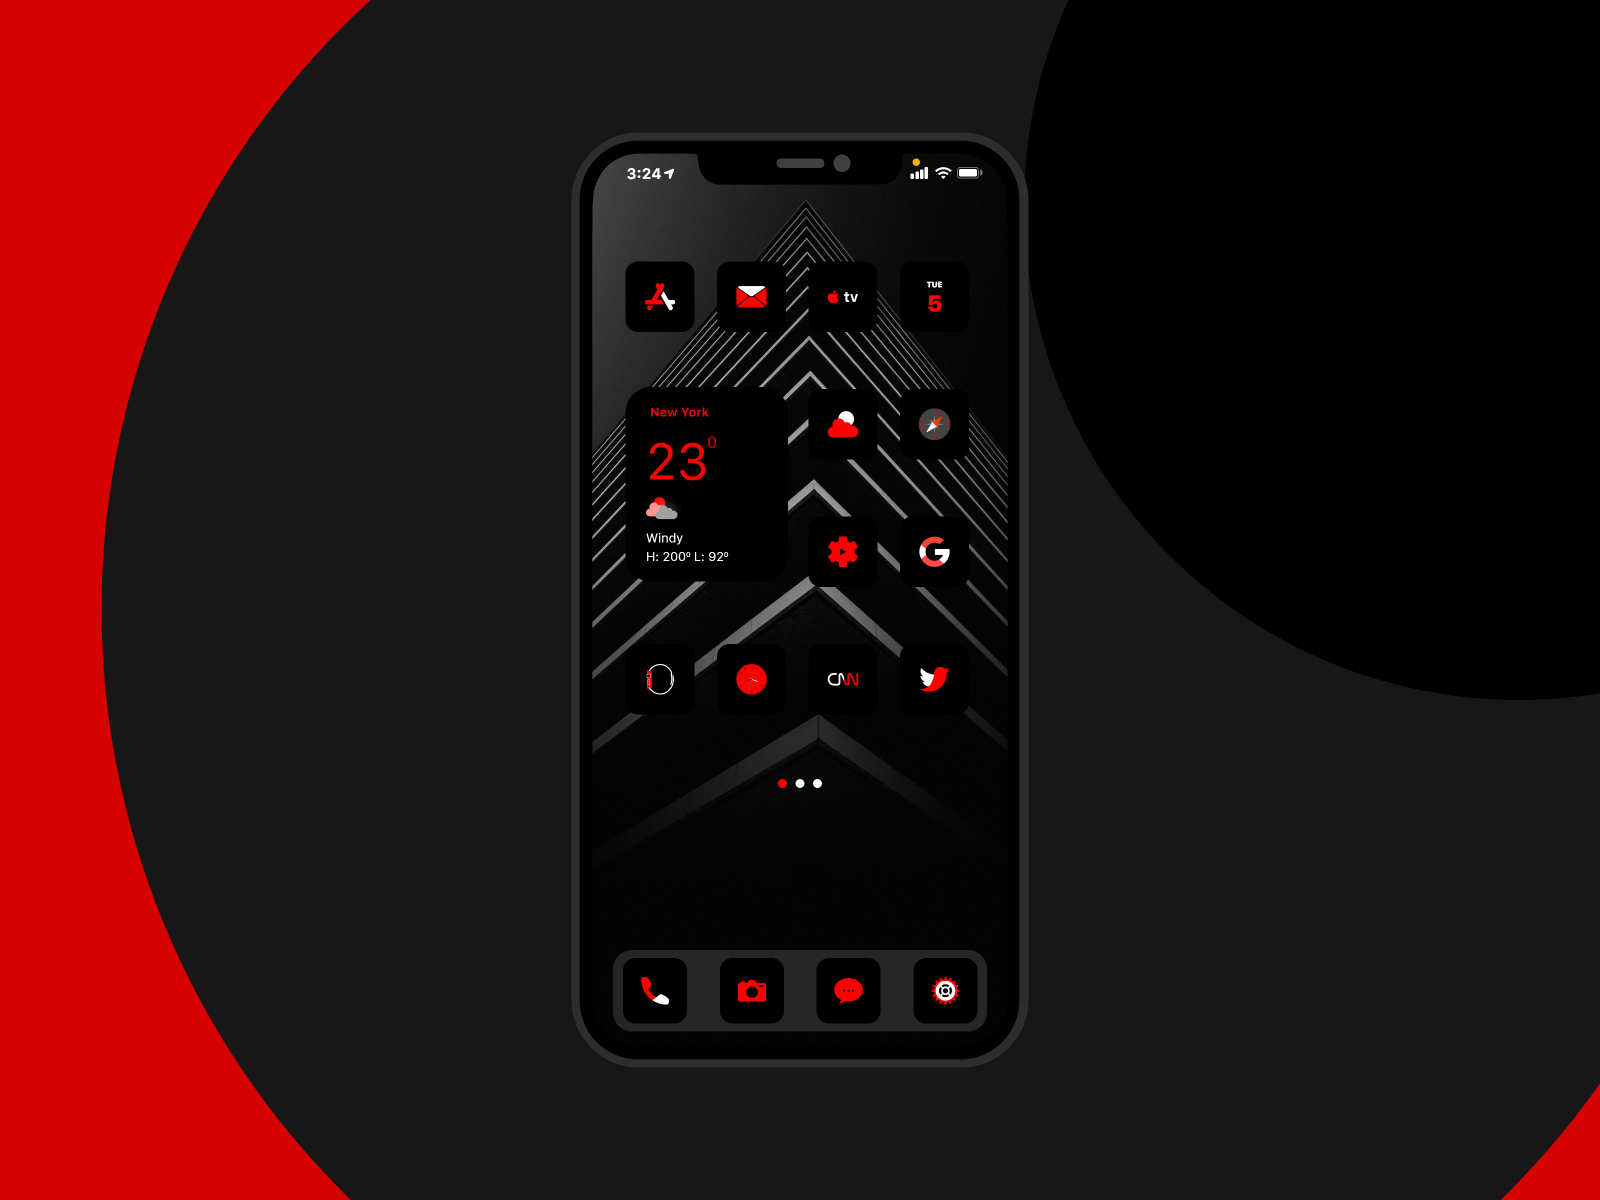 Red & Black 14 icons by Philip Oroni on Dribbble